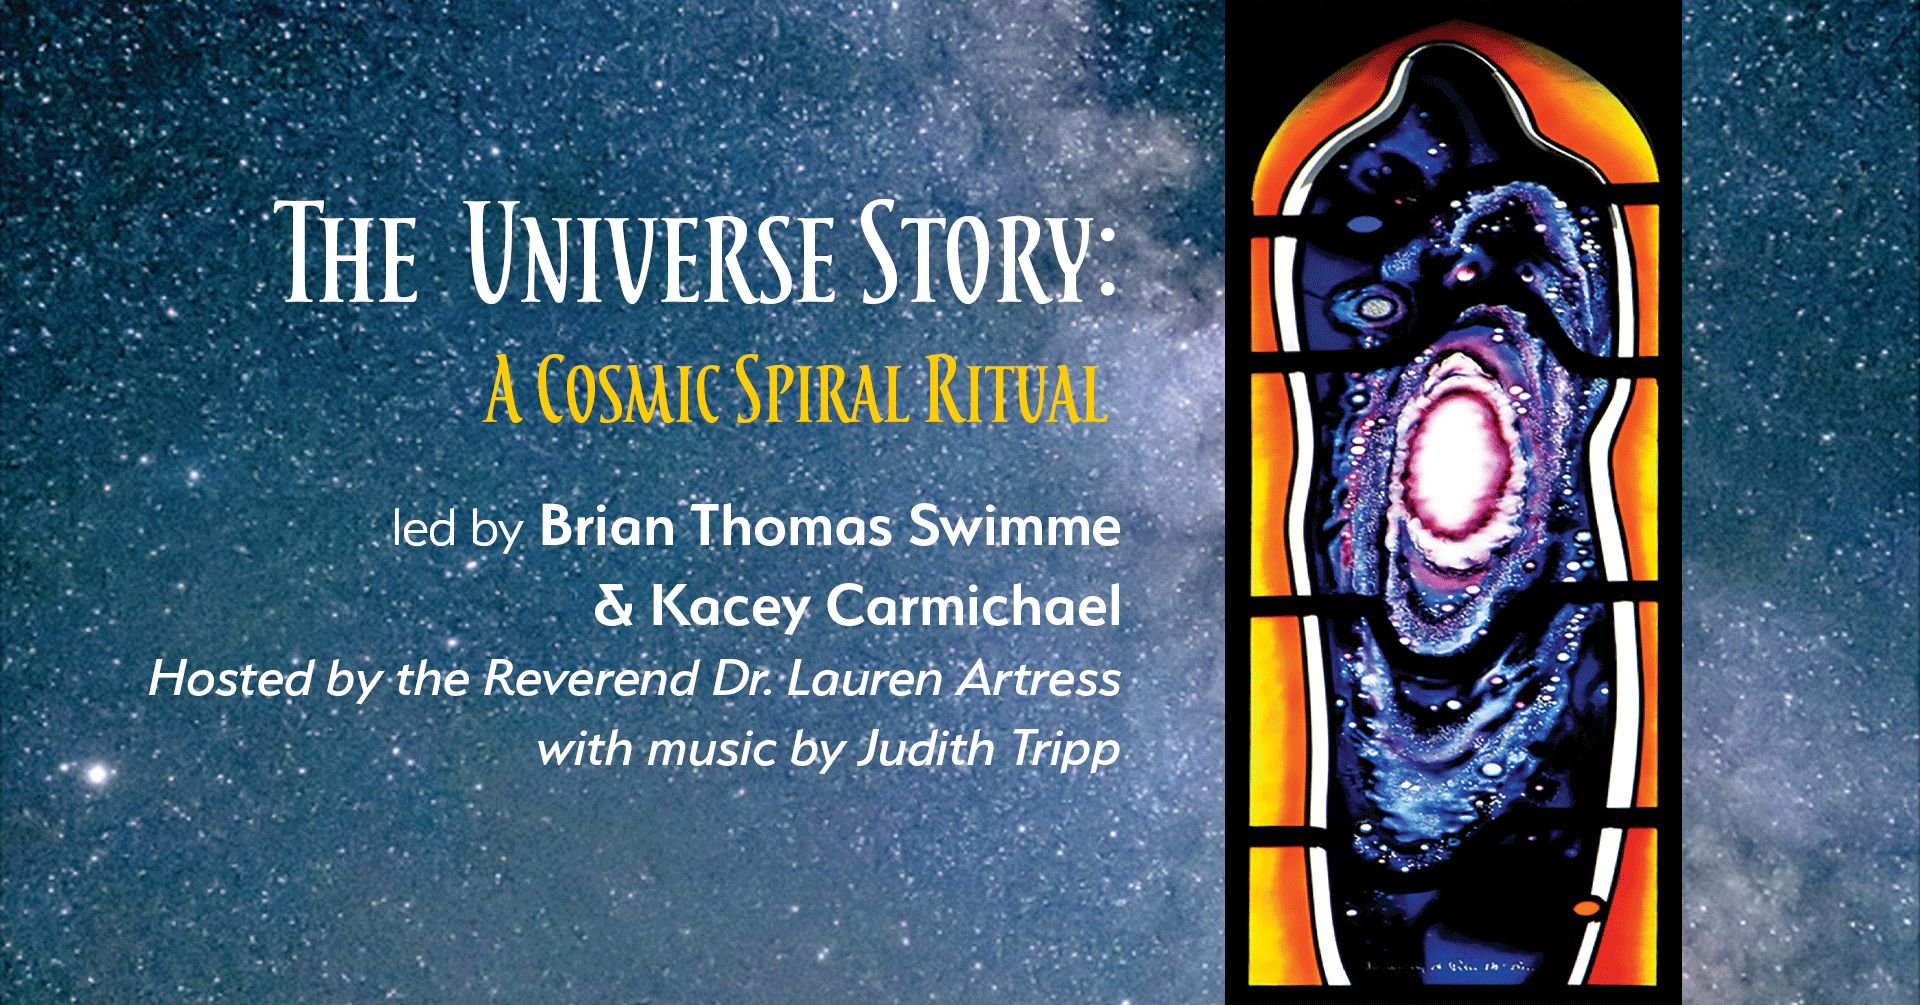 The Universe Story: A Cosmic Spiral Ritual led by Brian Thomas Swimme and Kacey Carmichael, San Francisco, California, United States